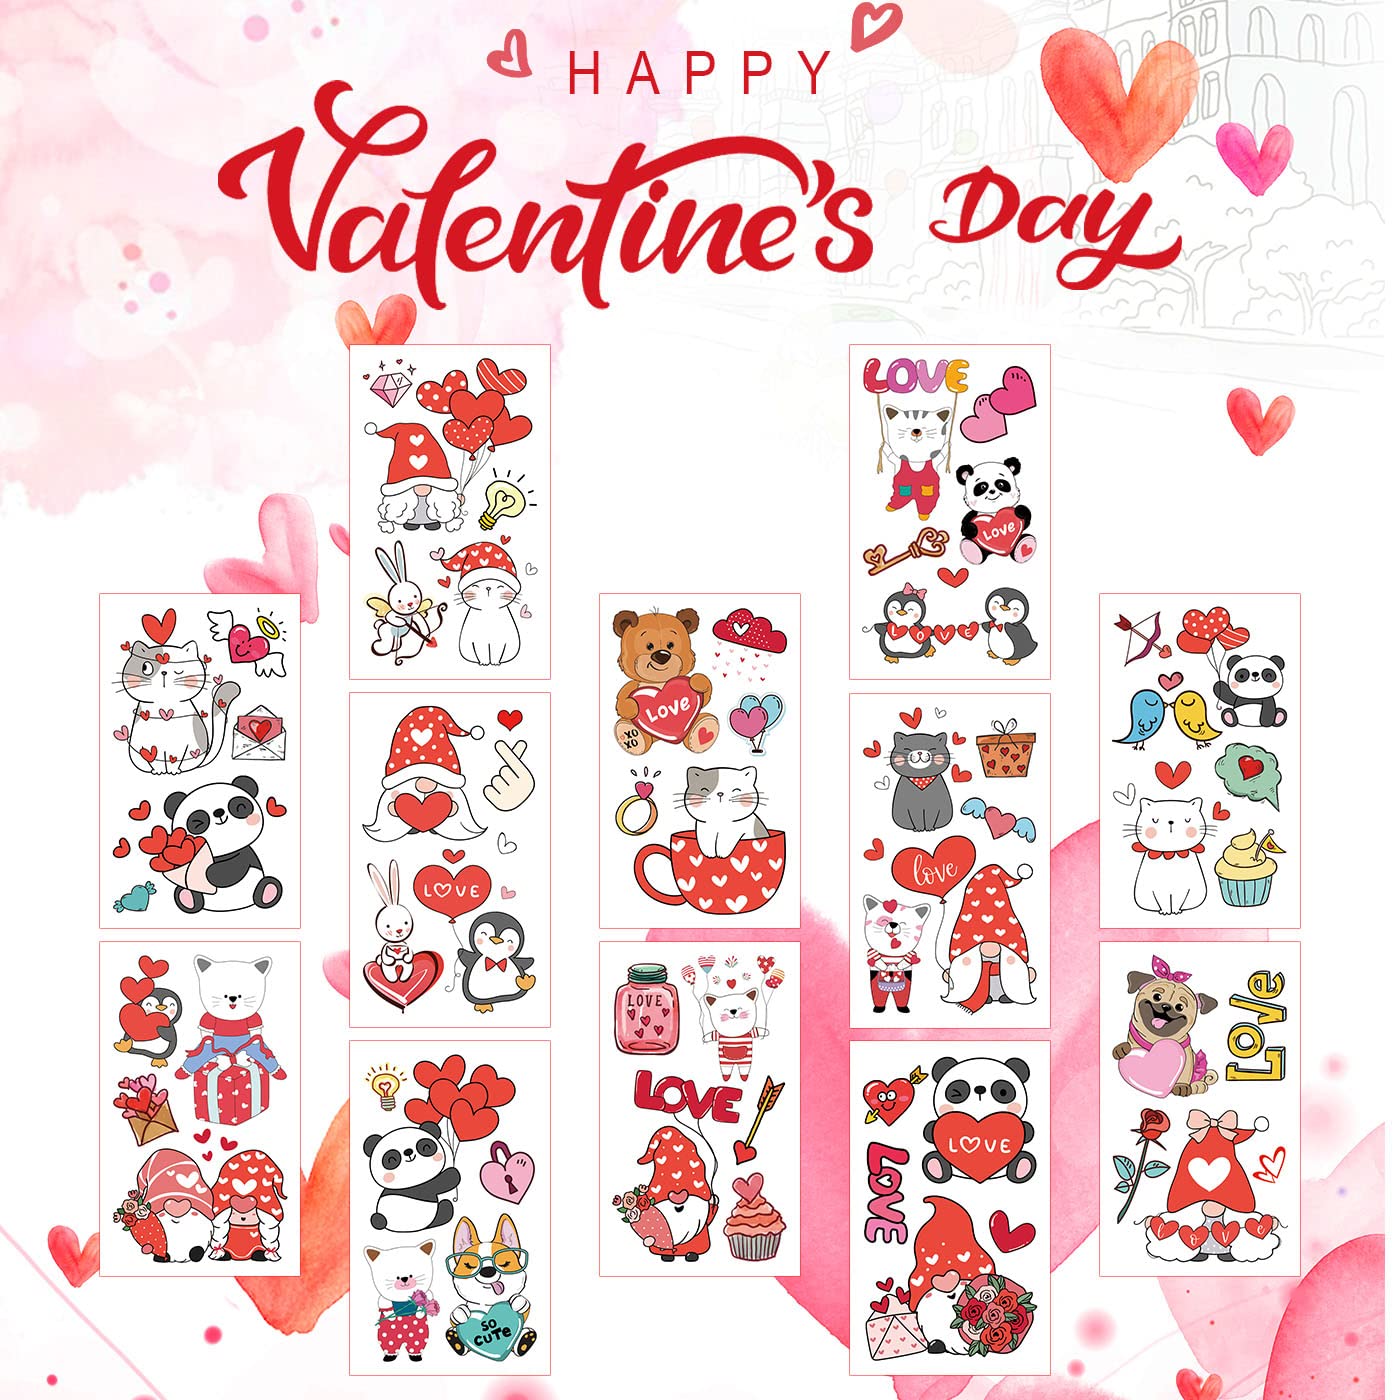 12 Sheets Valentines Day Temporary Tattoos for Kids, 56 Pcs Gnome Cat Panda Penguin Bear Love Heart Rose Cupid Cake Stickers for Valentines Decorations Party Favor